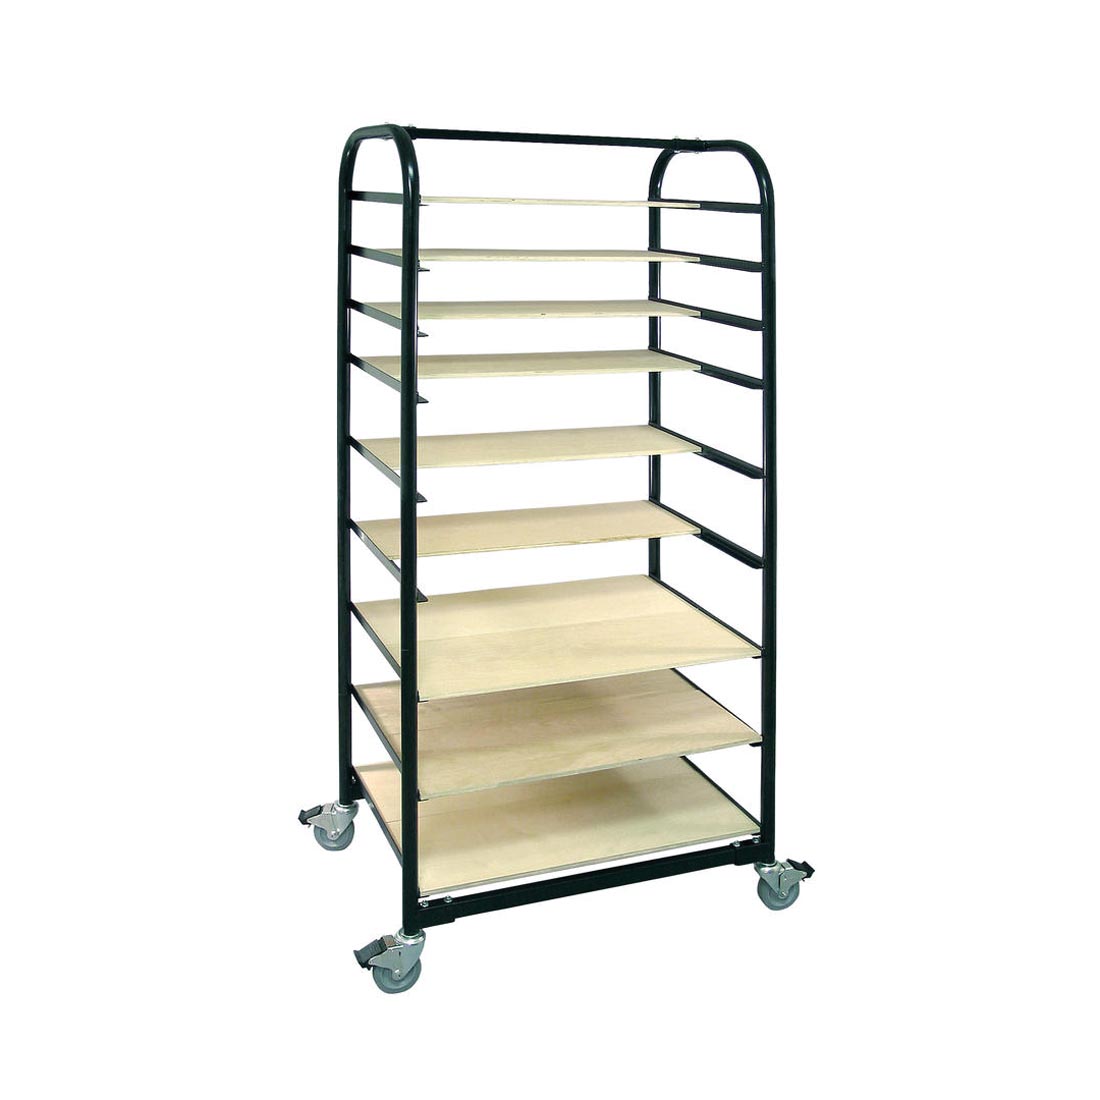 Brent Ware Cart EX, shown assembled with 3 full shelves and 6 half shelves